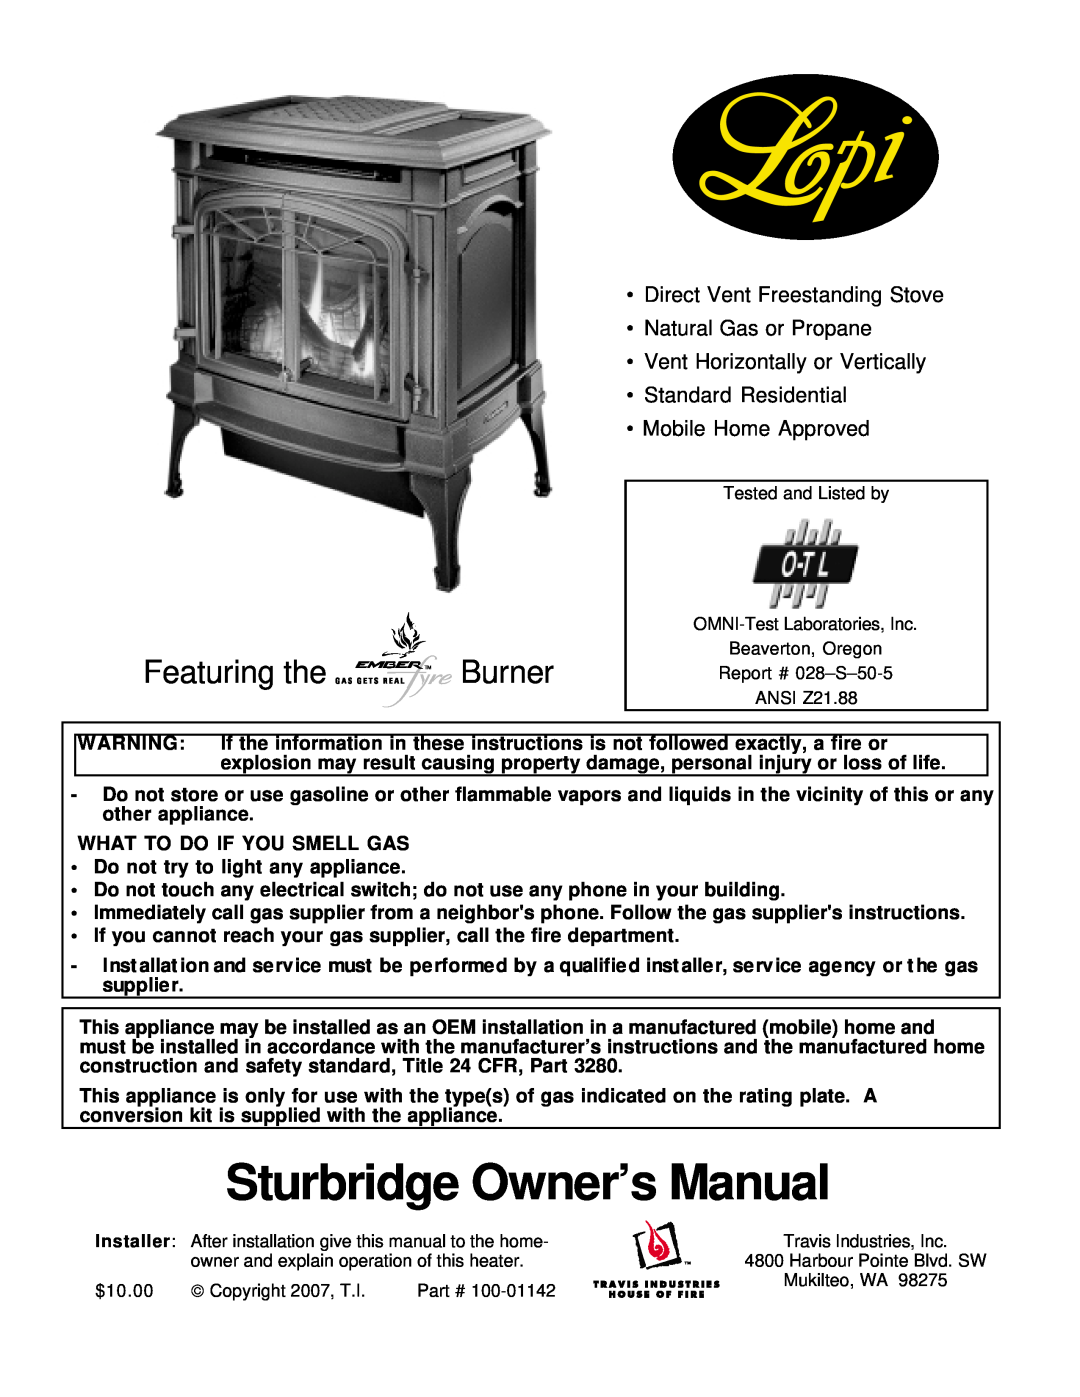 Lopi Direct Vent Freestanding Stove owner manual Natural Gas or Propane, Vent Horizontally or Vertically 